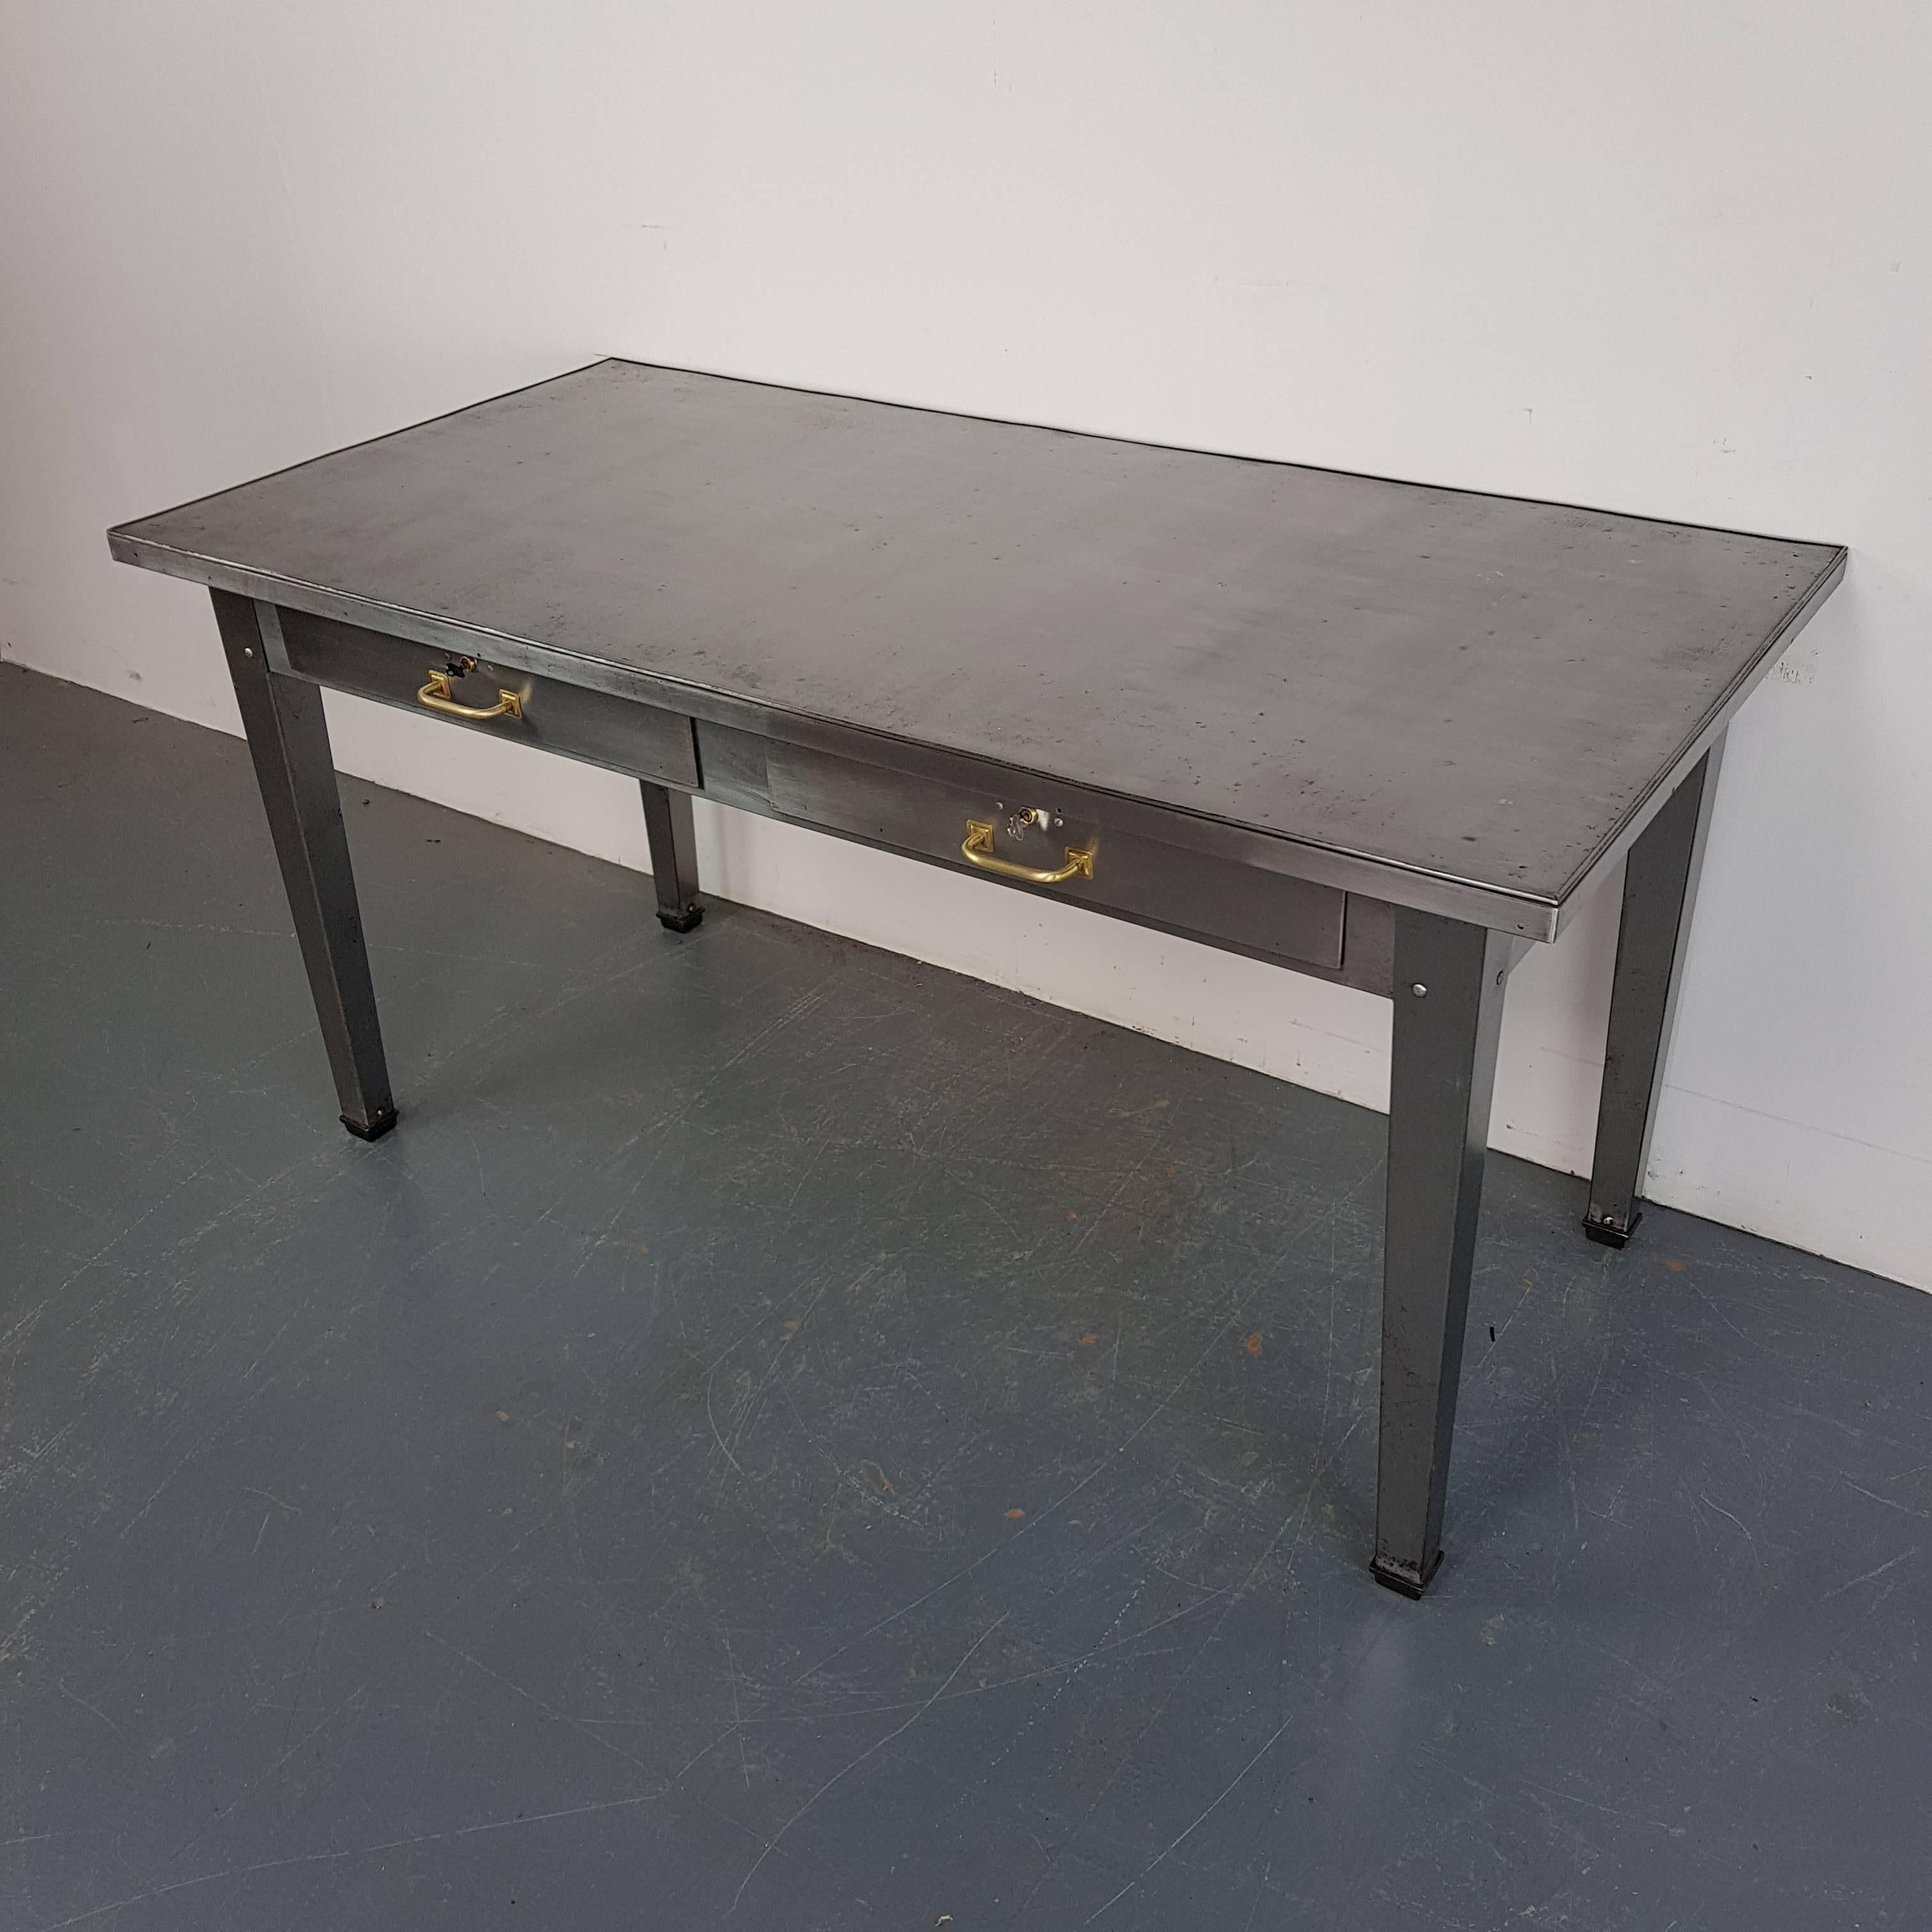 British Vintage Industrial Stripped and Polished Steel Table For Sale